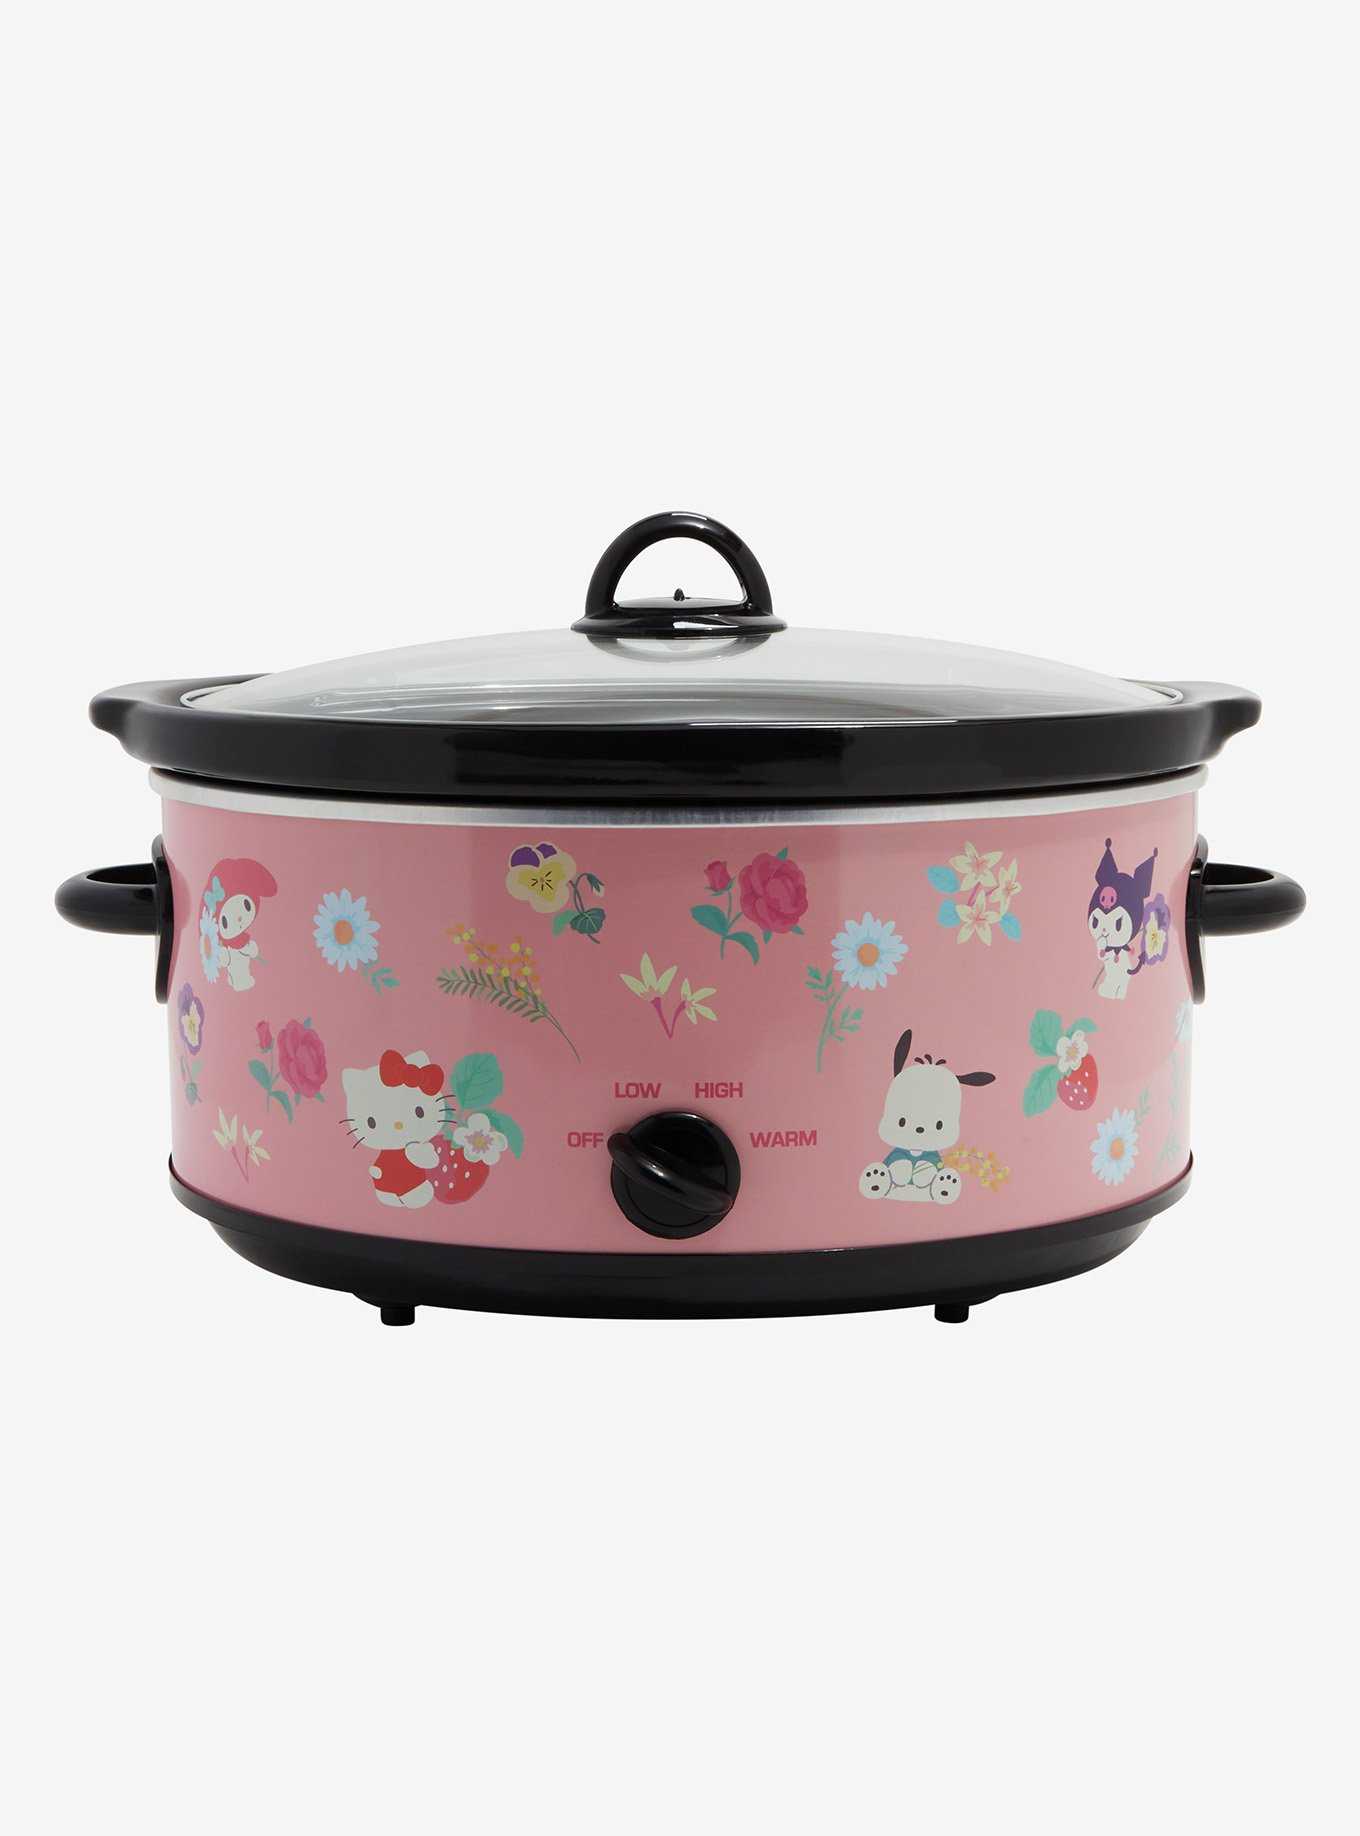  Customer reviews: Hello Kitty Slow Cooker - Pink (APP